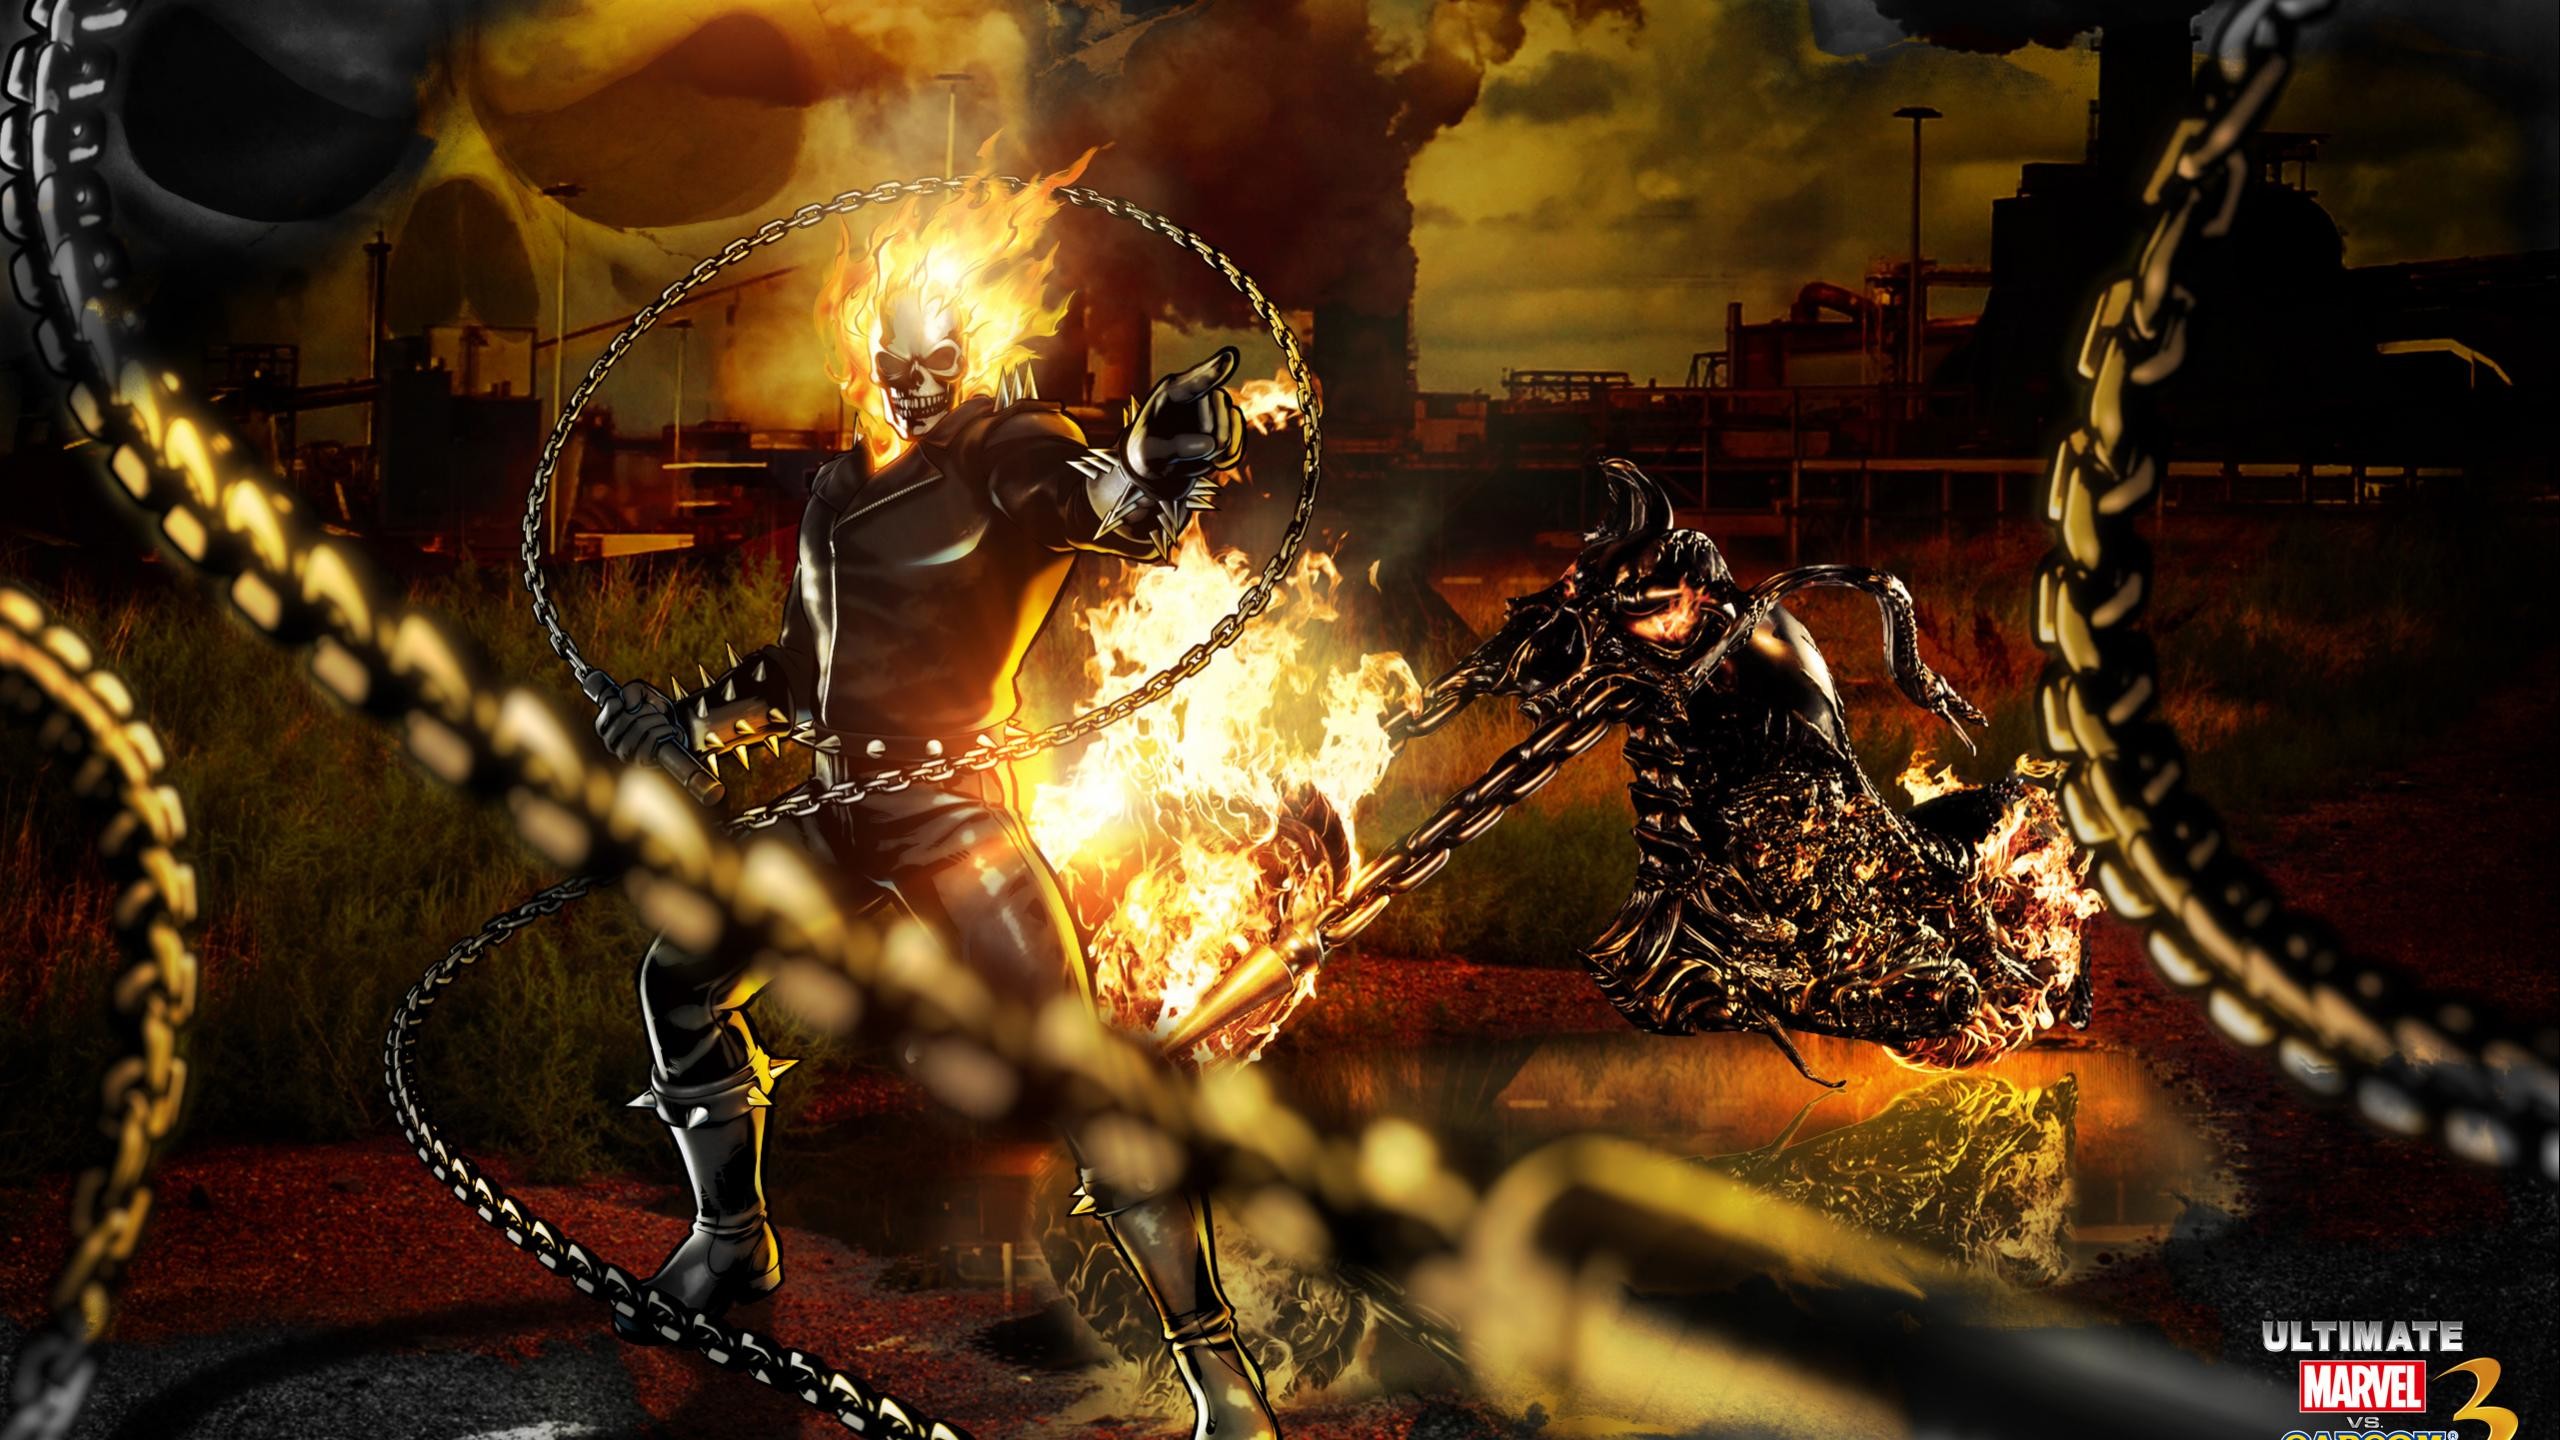 2560x1440 Ghost Rider Marvel Vs Capcom Wallpaper size available for downloads